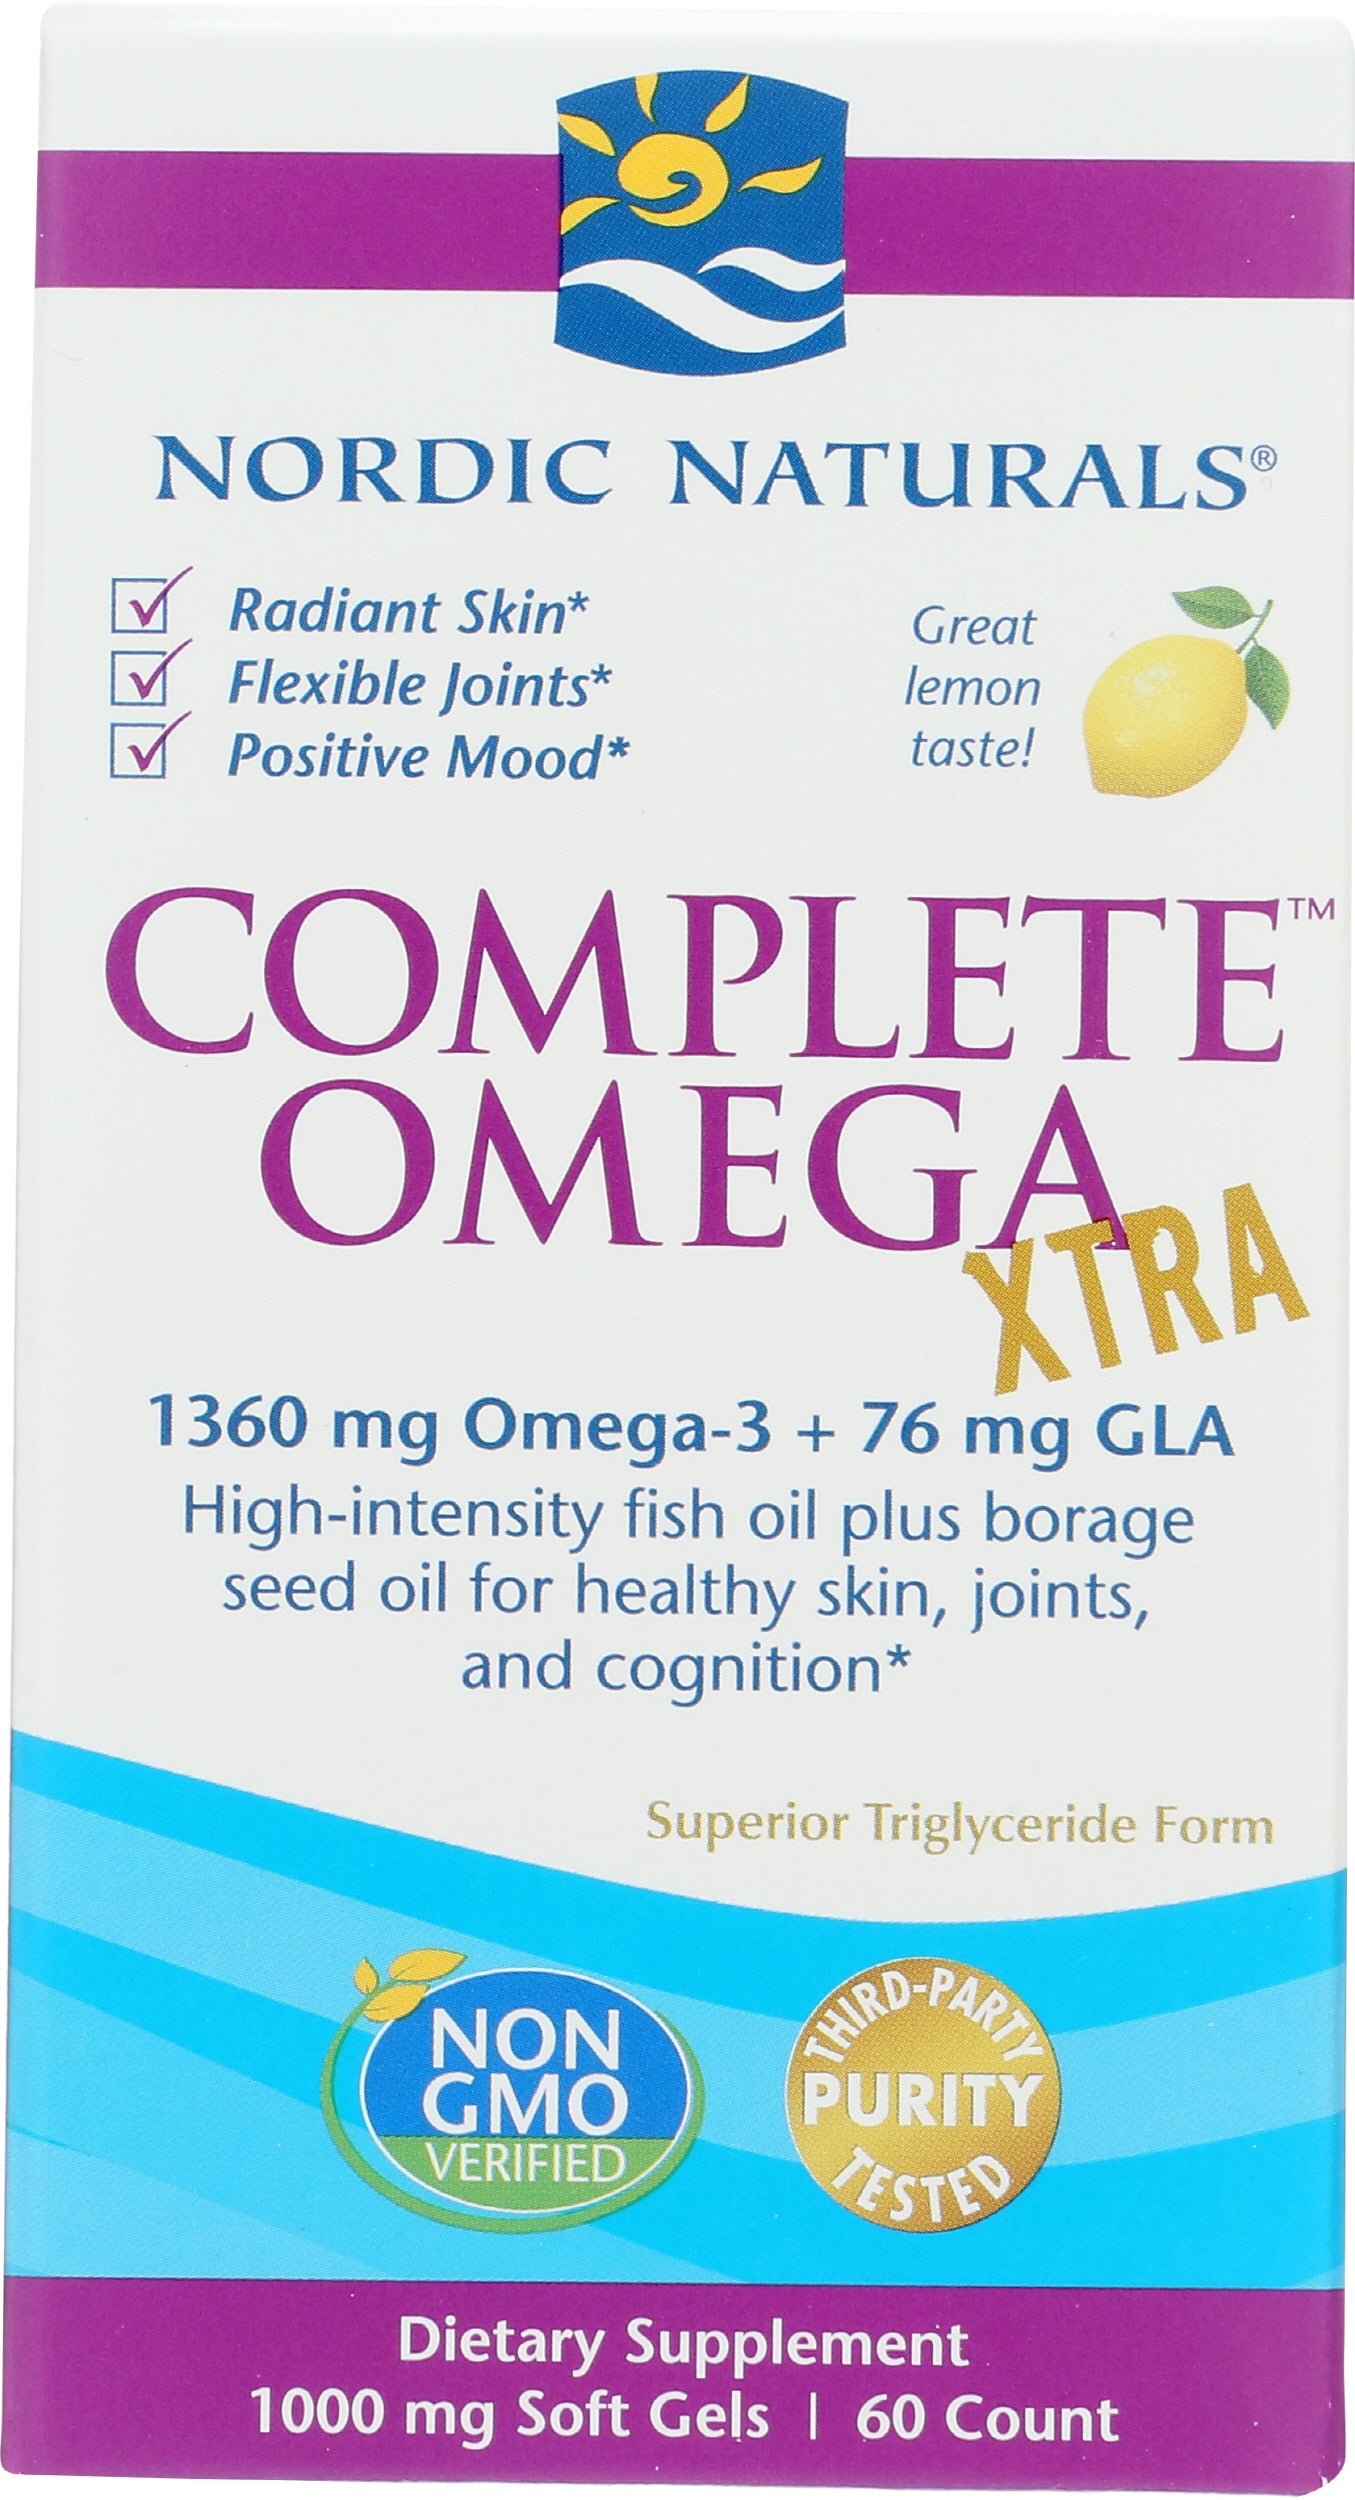 Nordic Naturals Complete Omega Xtra 1360 mg + 76 mg GLA 60 Soft Gels Front of Box